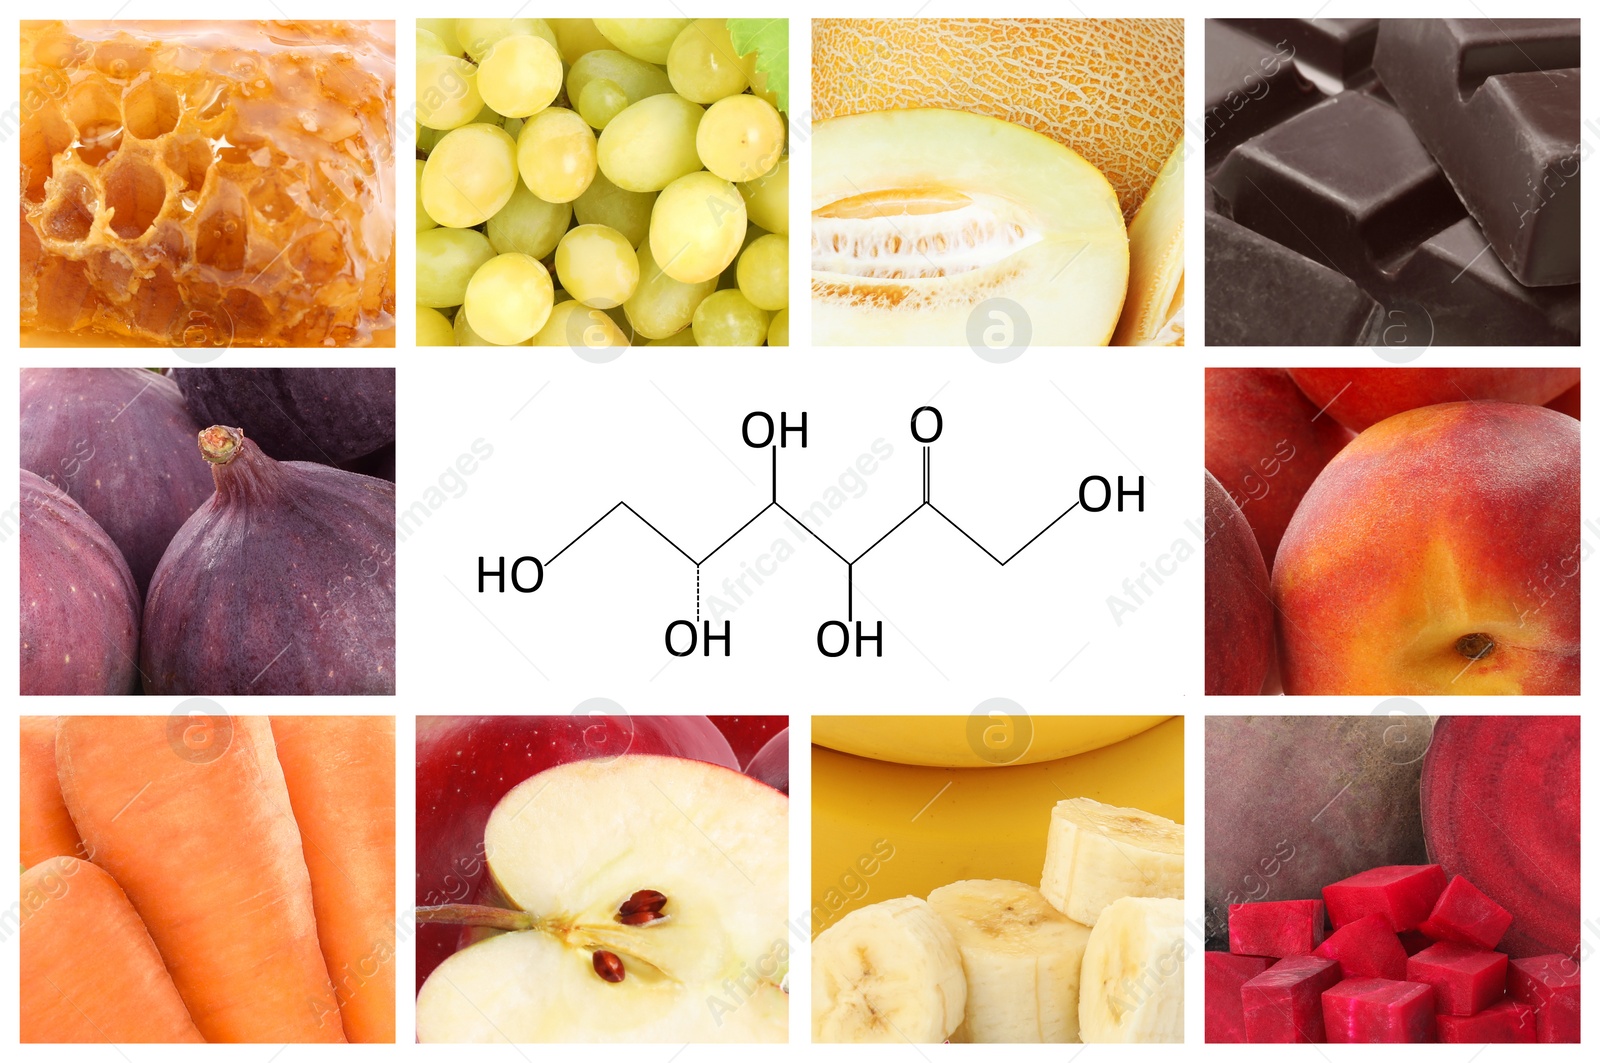 Image of Collage with photos of different products containing fructose 